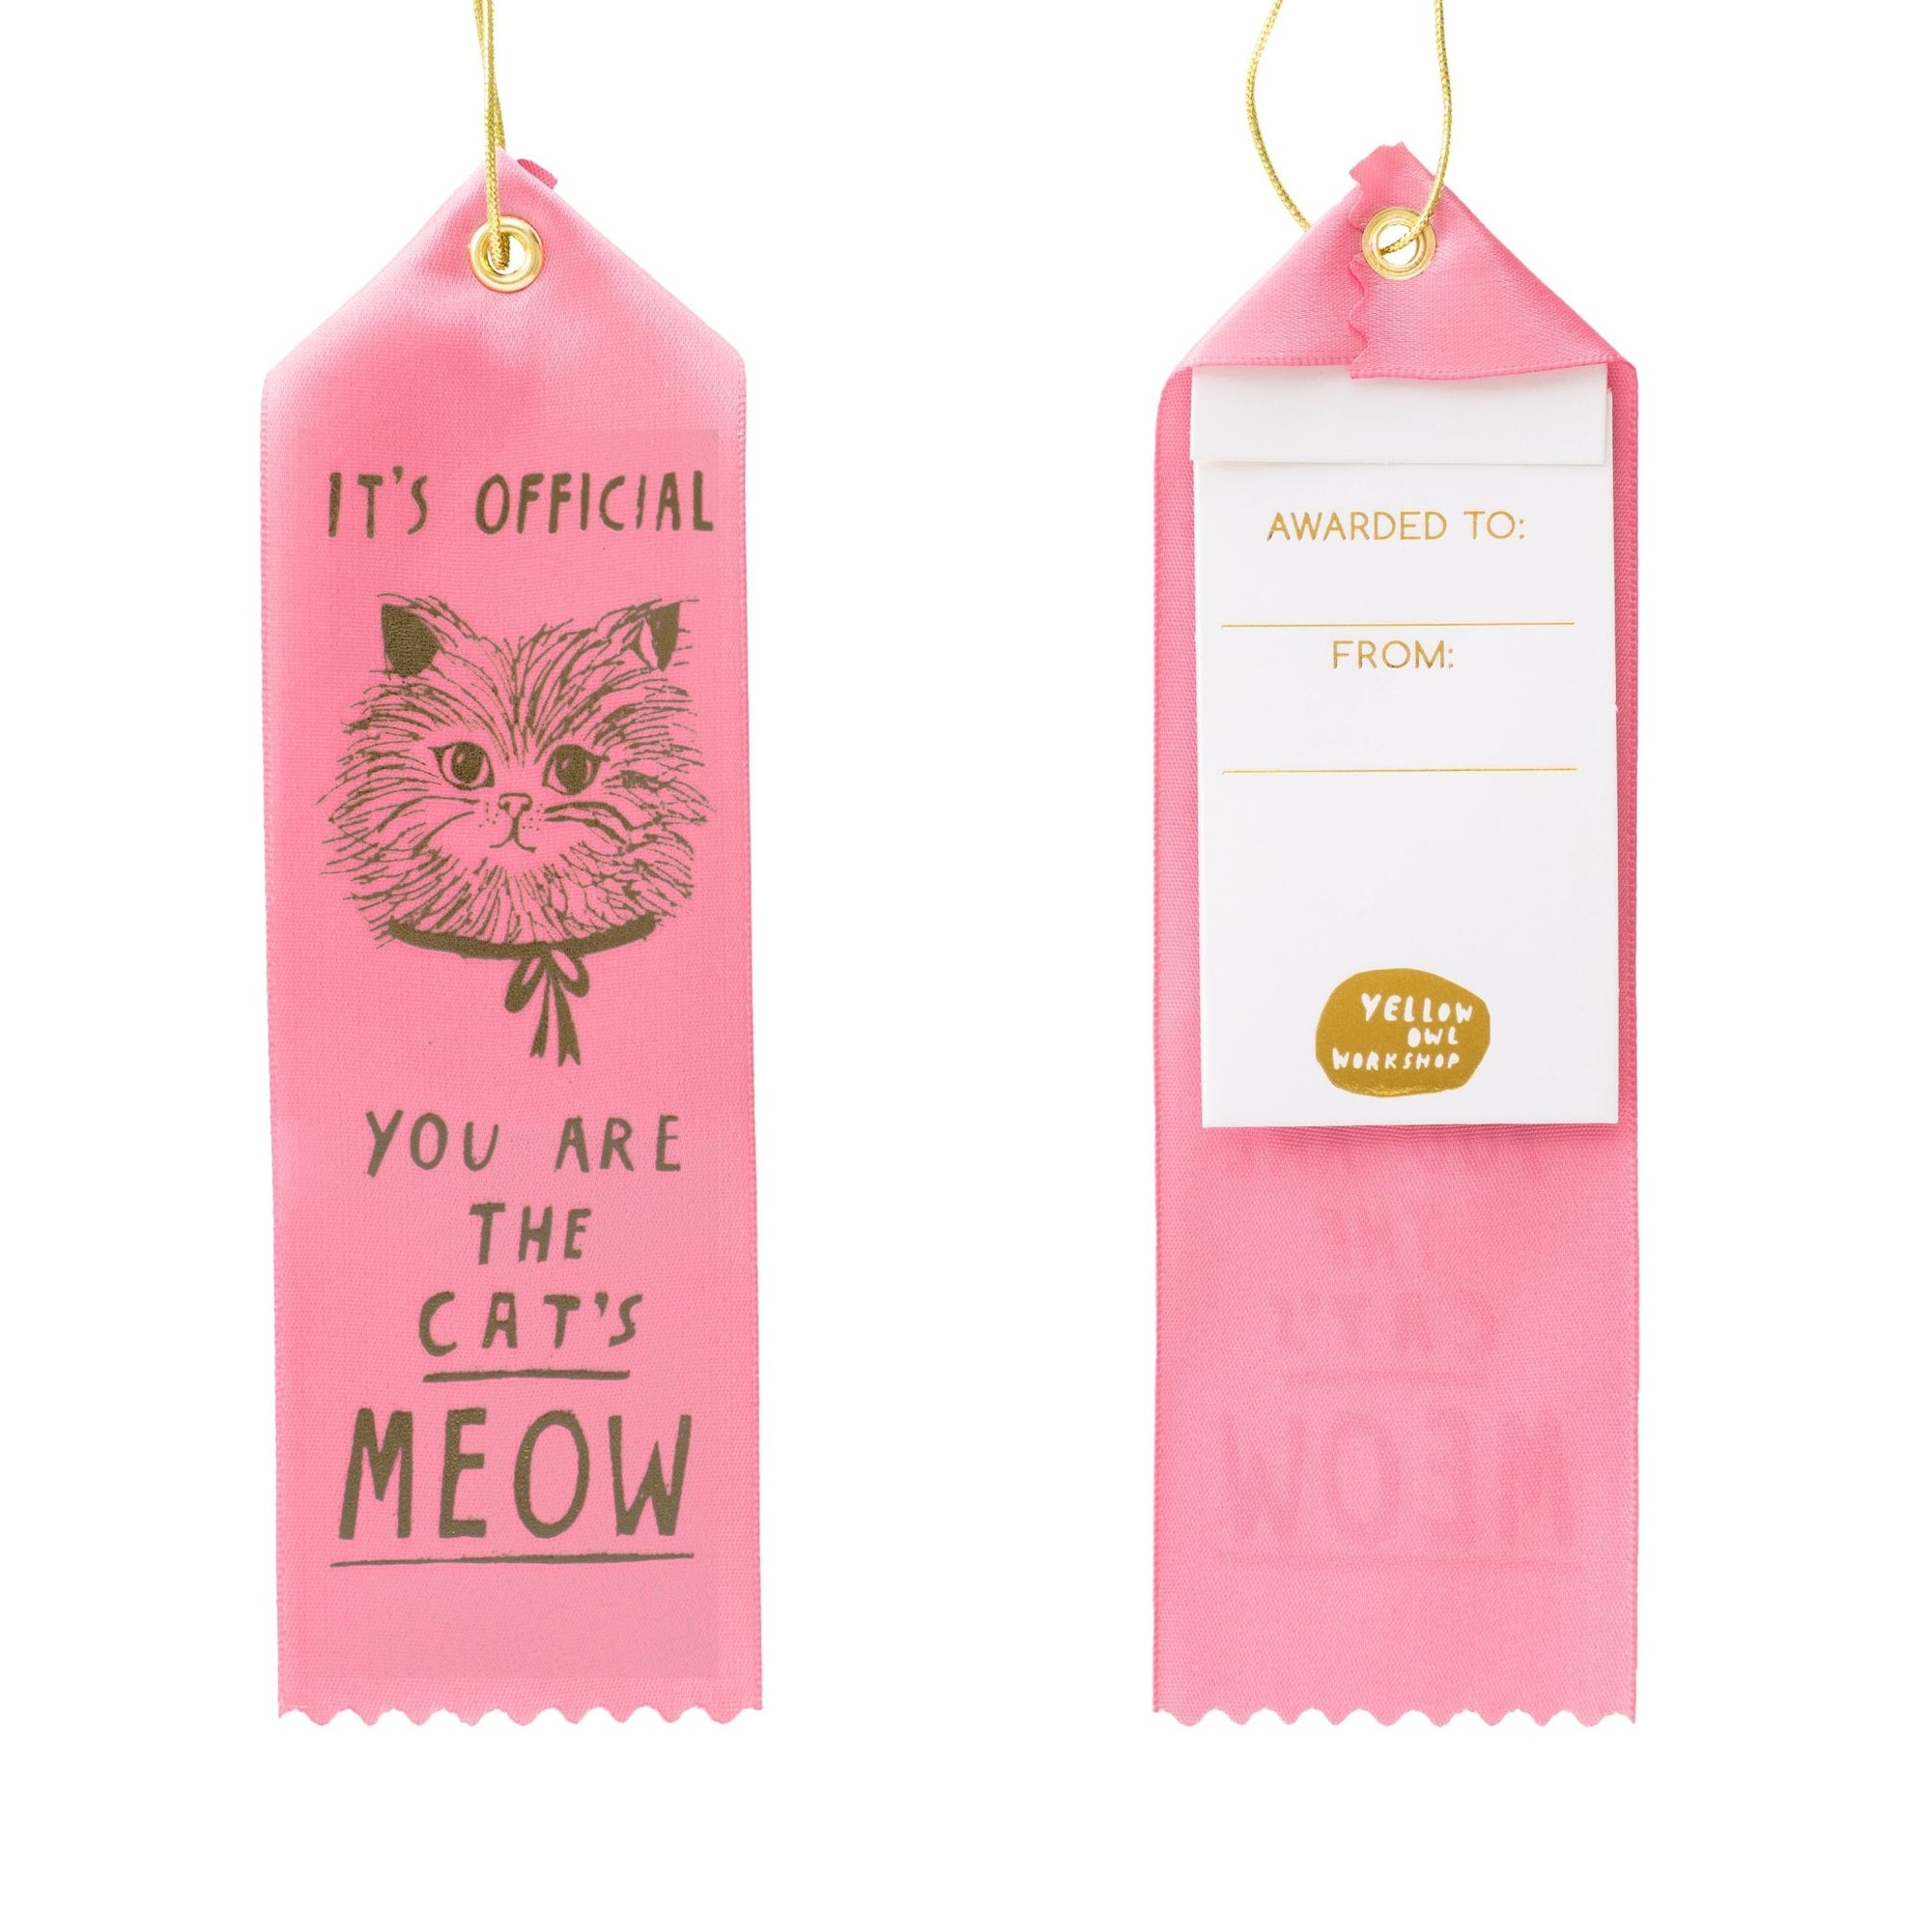 You are the Cat's Meow! - Award Ribbon Card - Yellow Owl Workshop